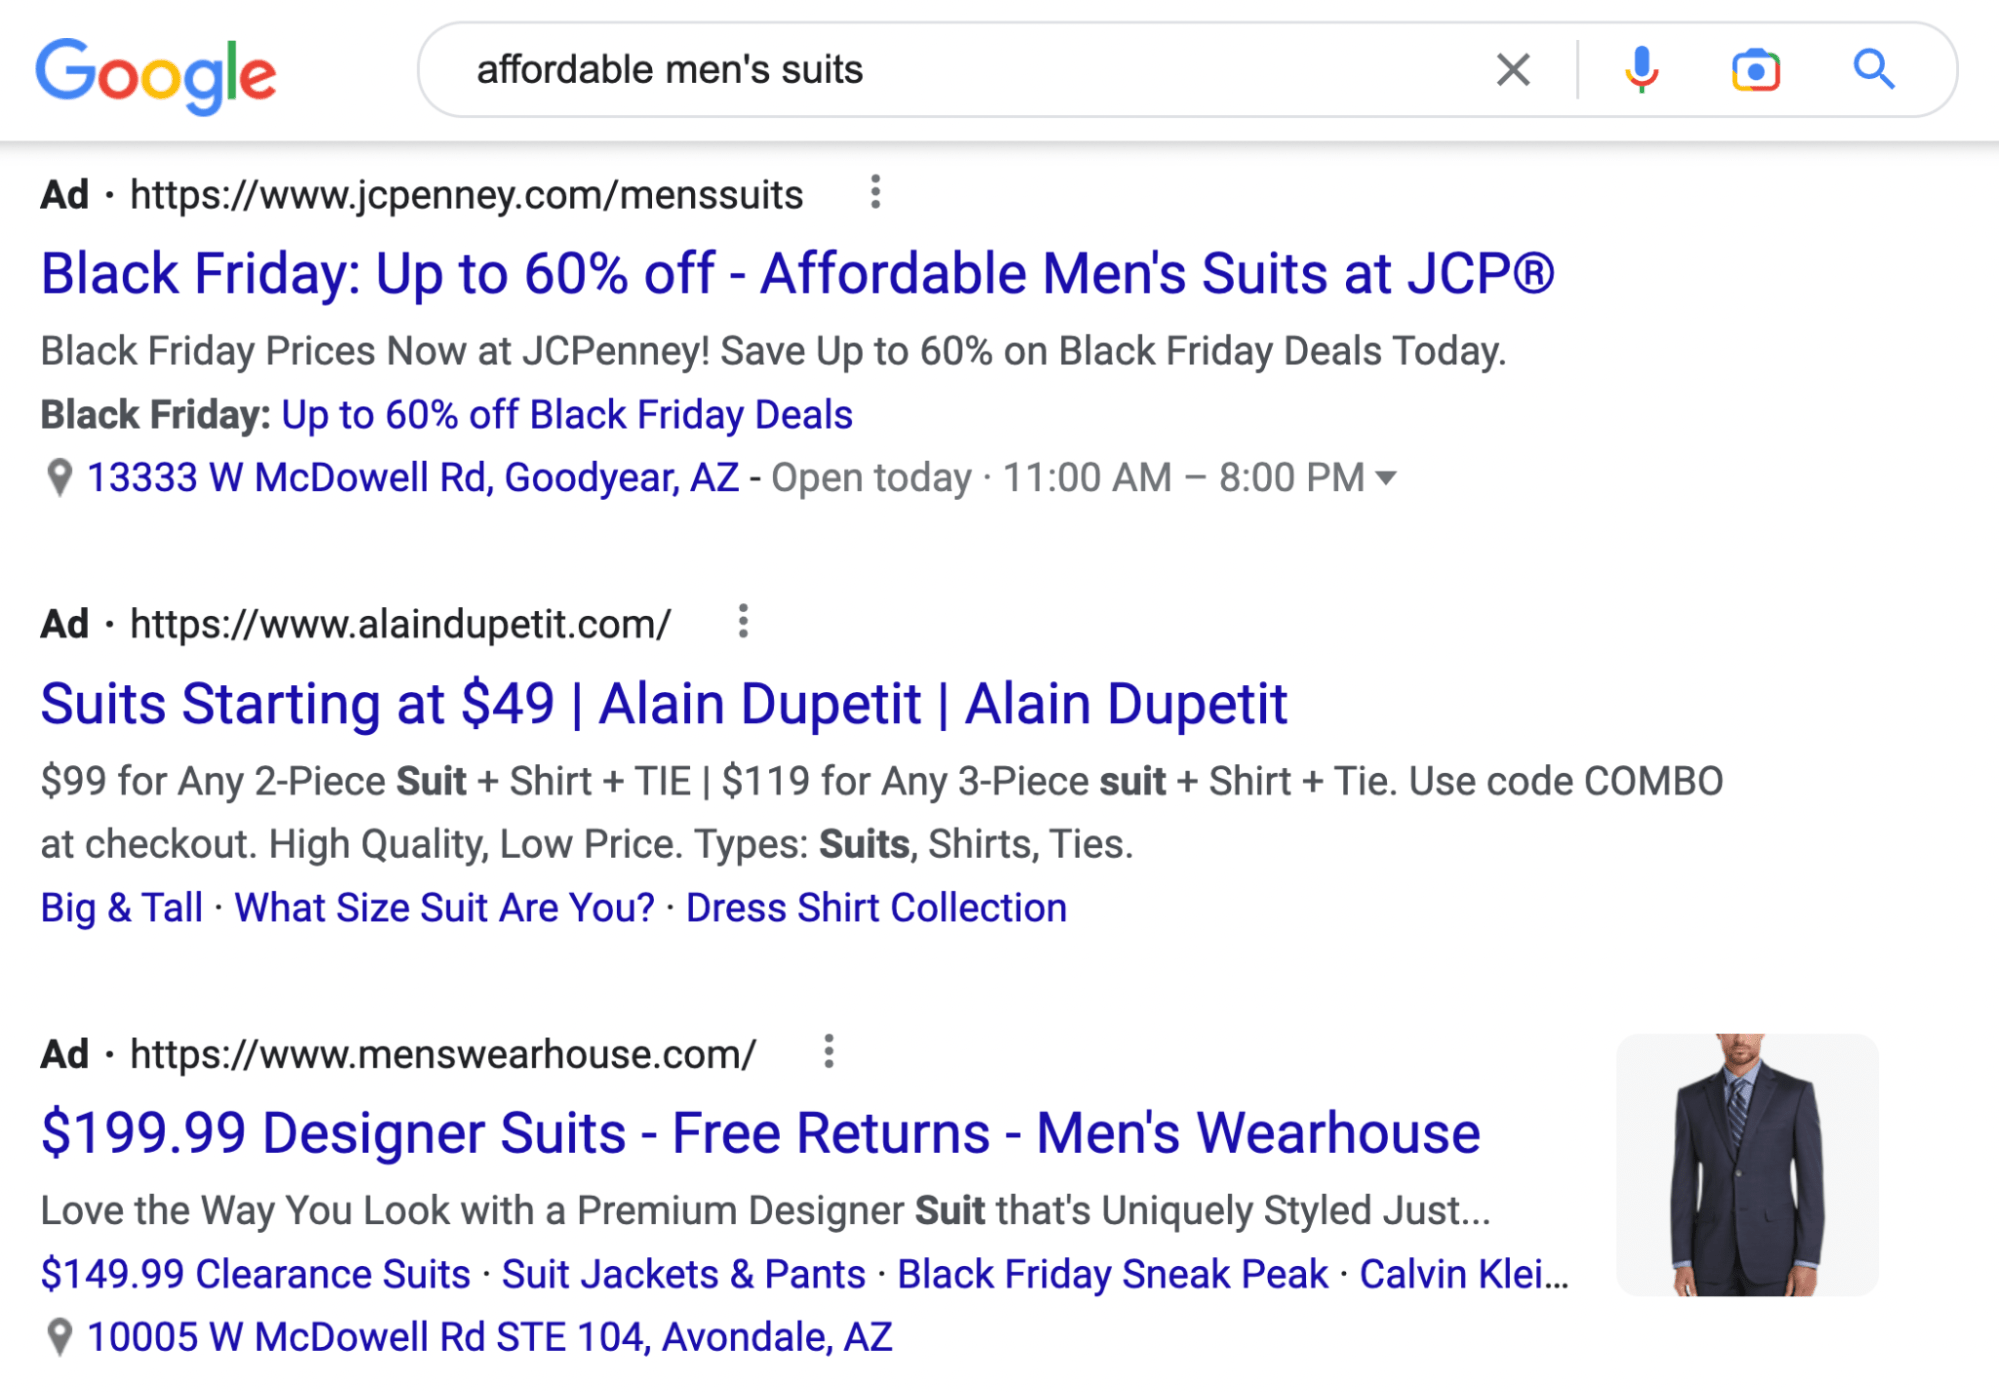 Google search results for "affordable men's suits"